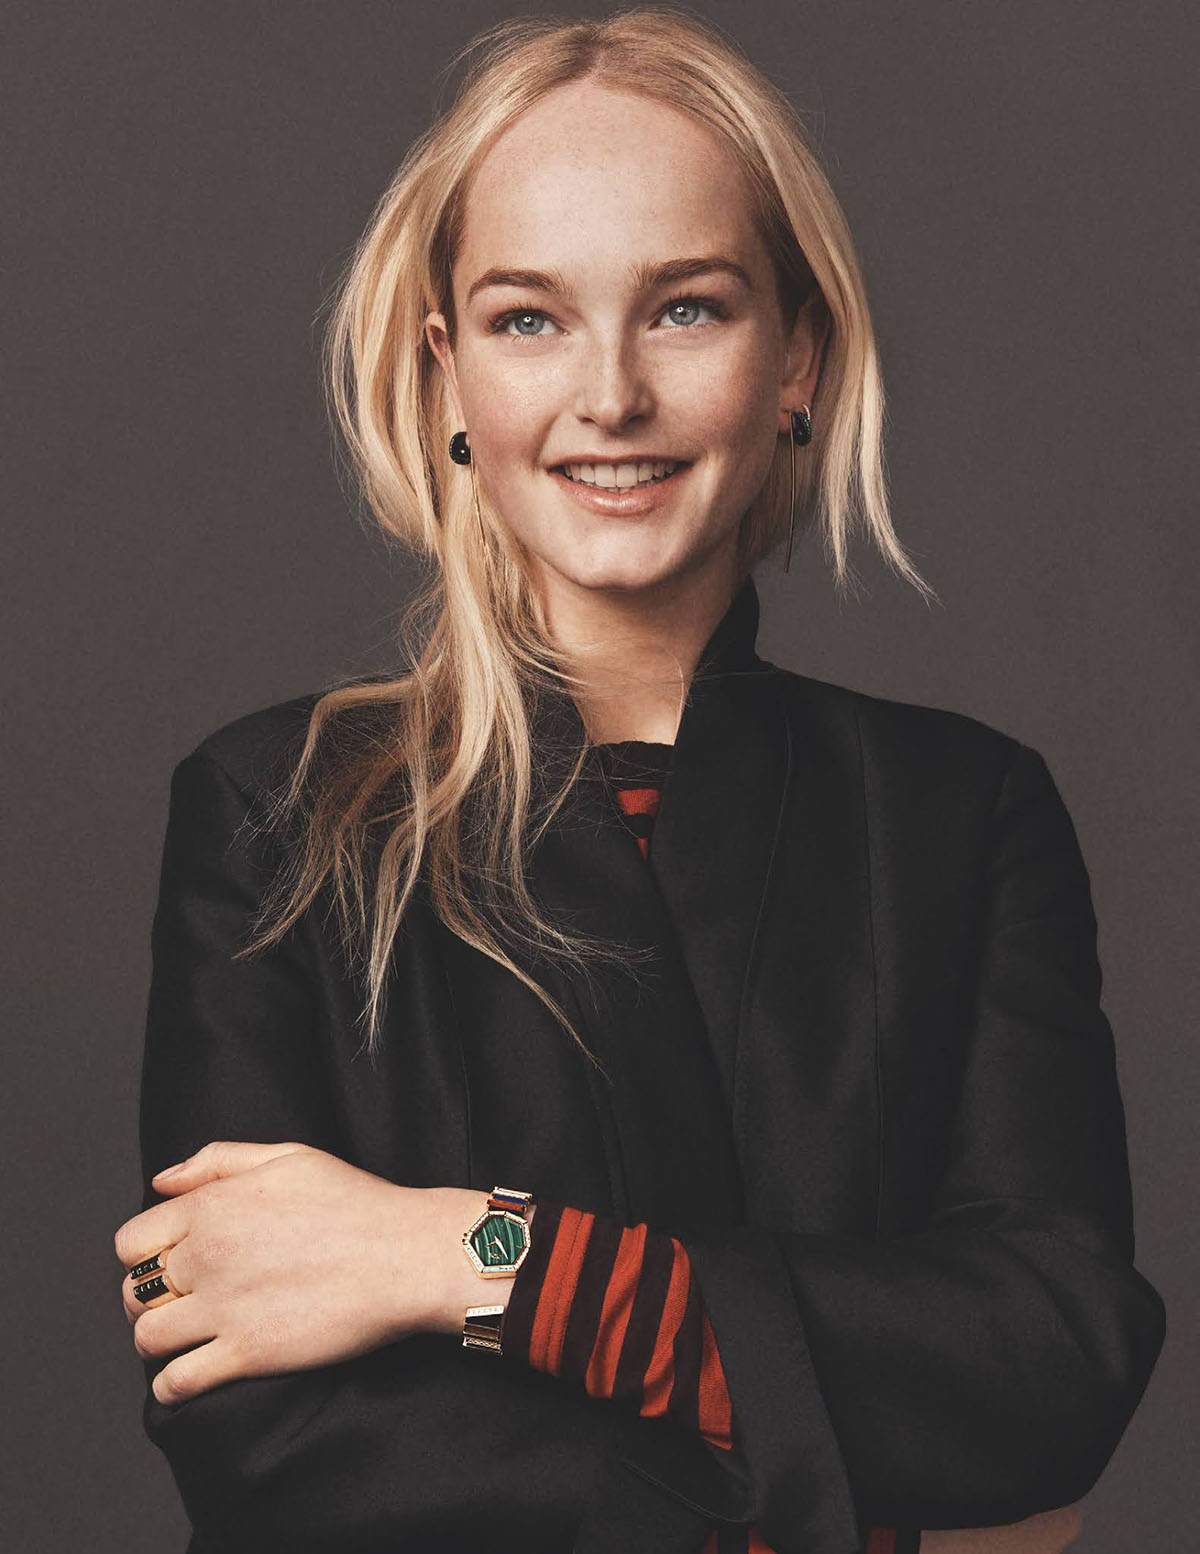 Jean Campbell covers British Vogue Watches May 2021 by Ben Weller